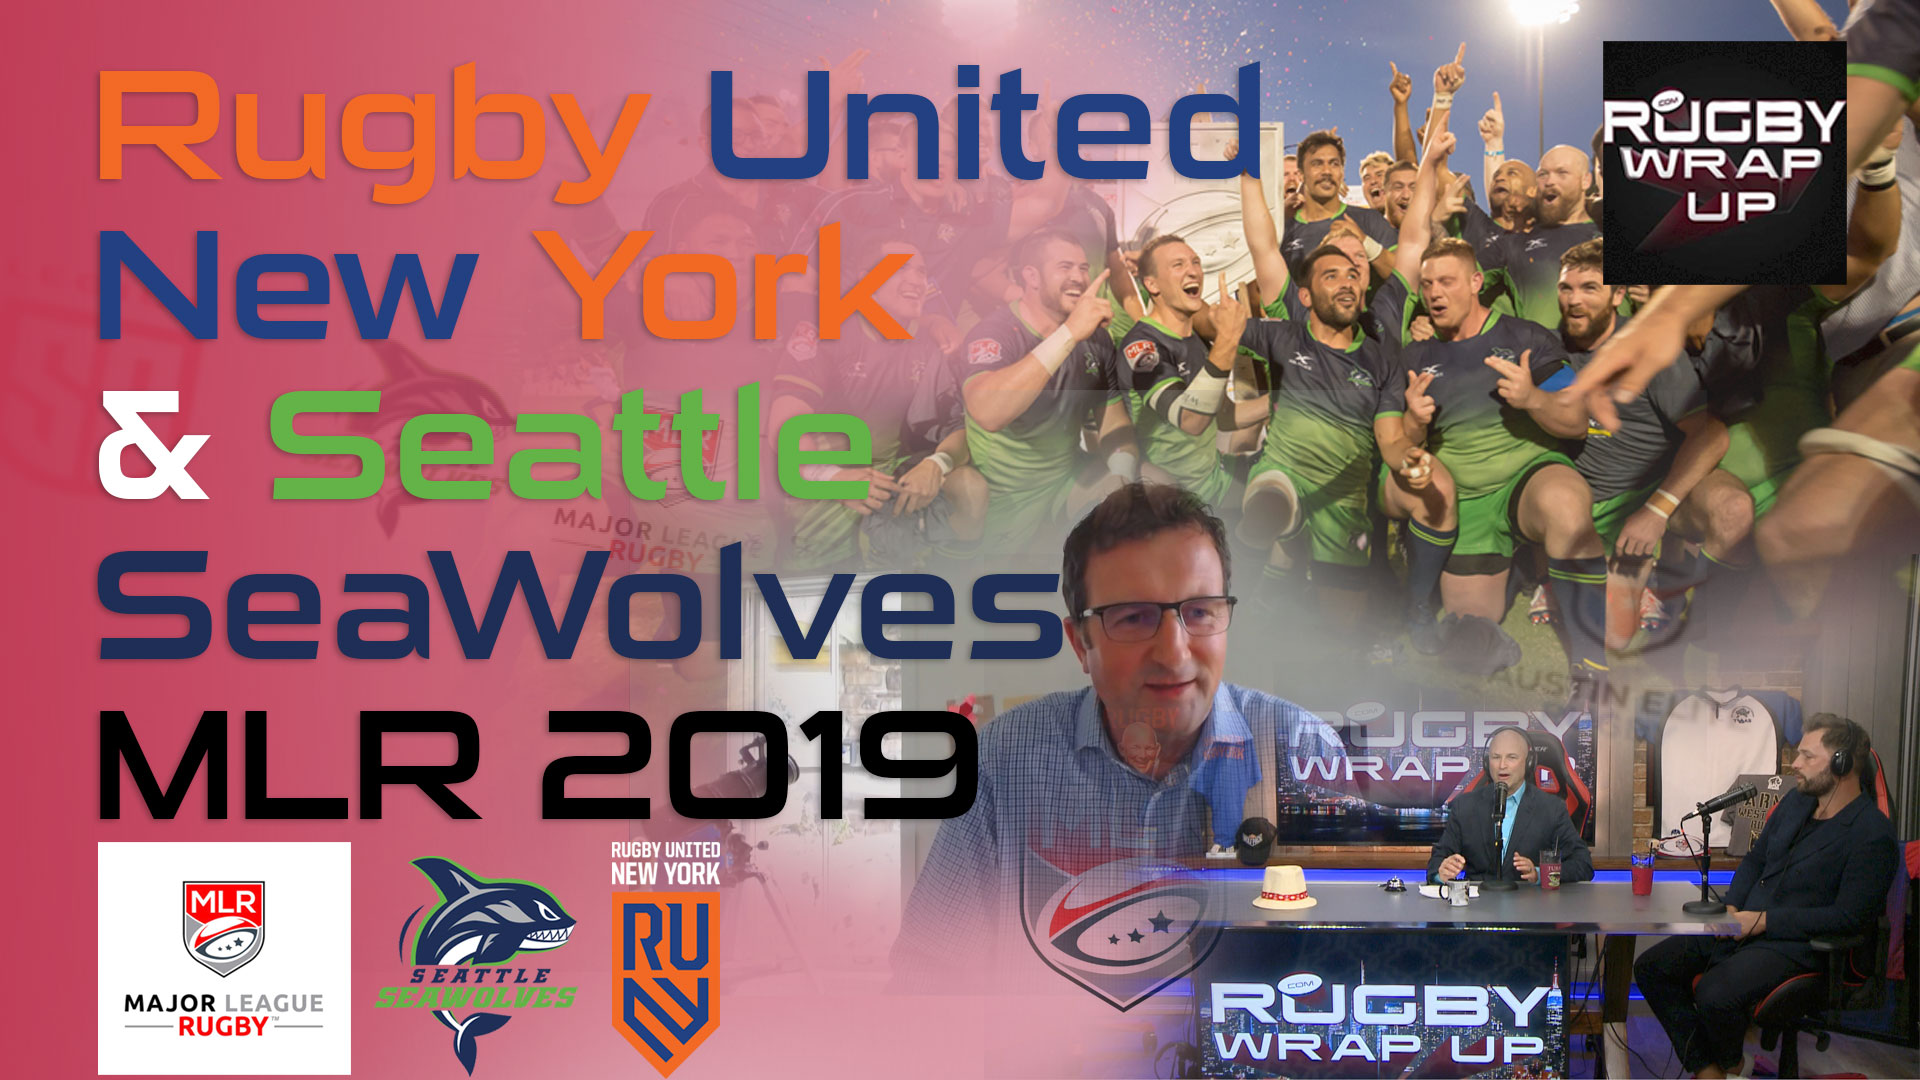 Major League Rugby's Adrian Balfour (Owner/Co-Founder) of the Seattle Seawolves and GM James English of Rugby United New York talk with our Matt McCarthy